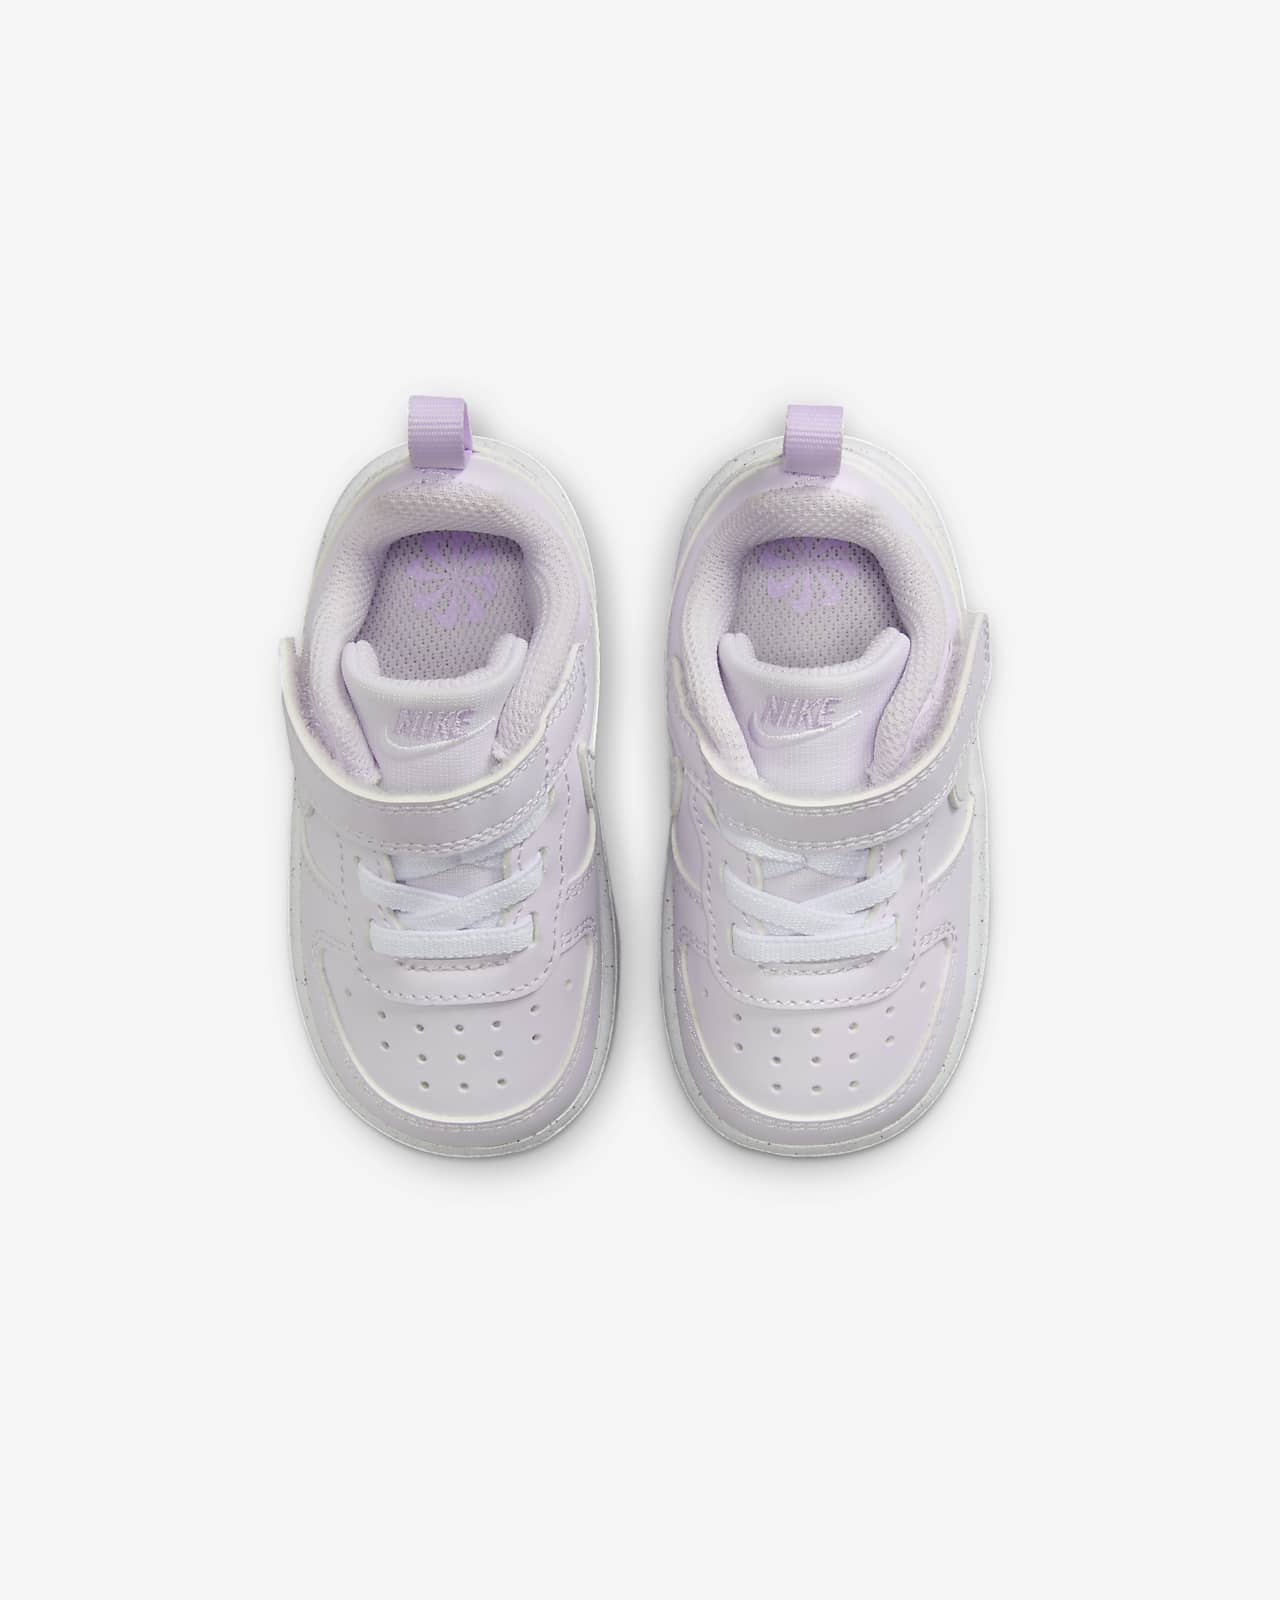 Borough Low Recraft Shoes. Baby/Toddler Court Nike